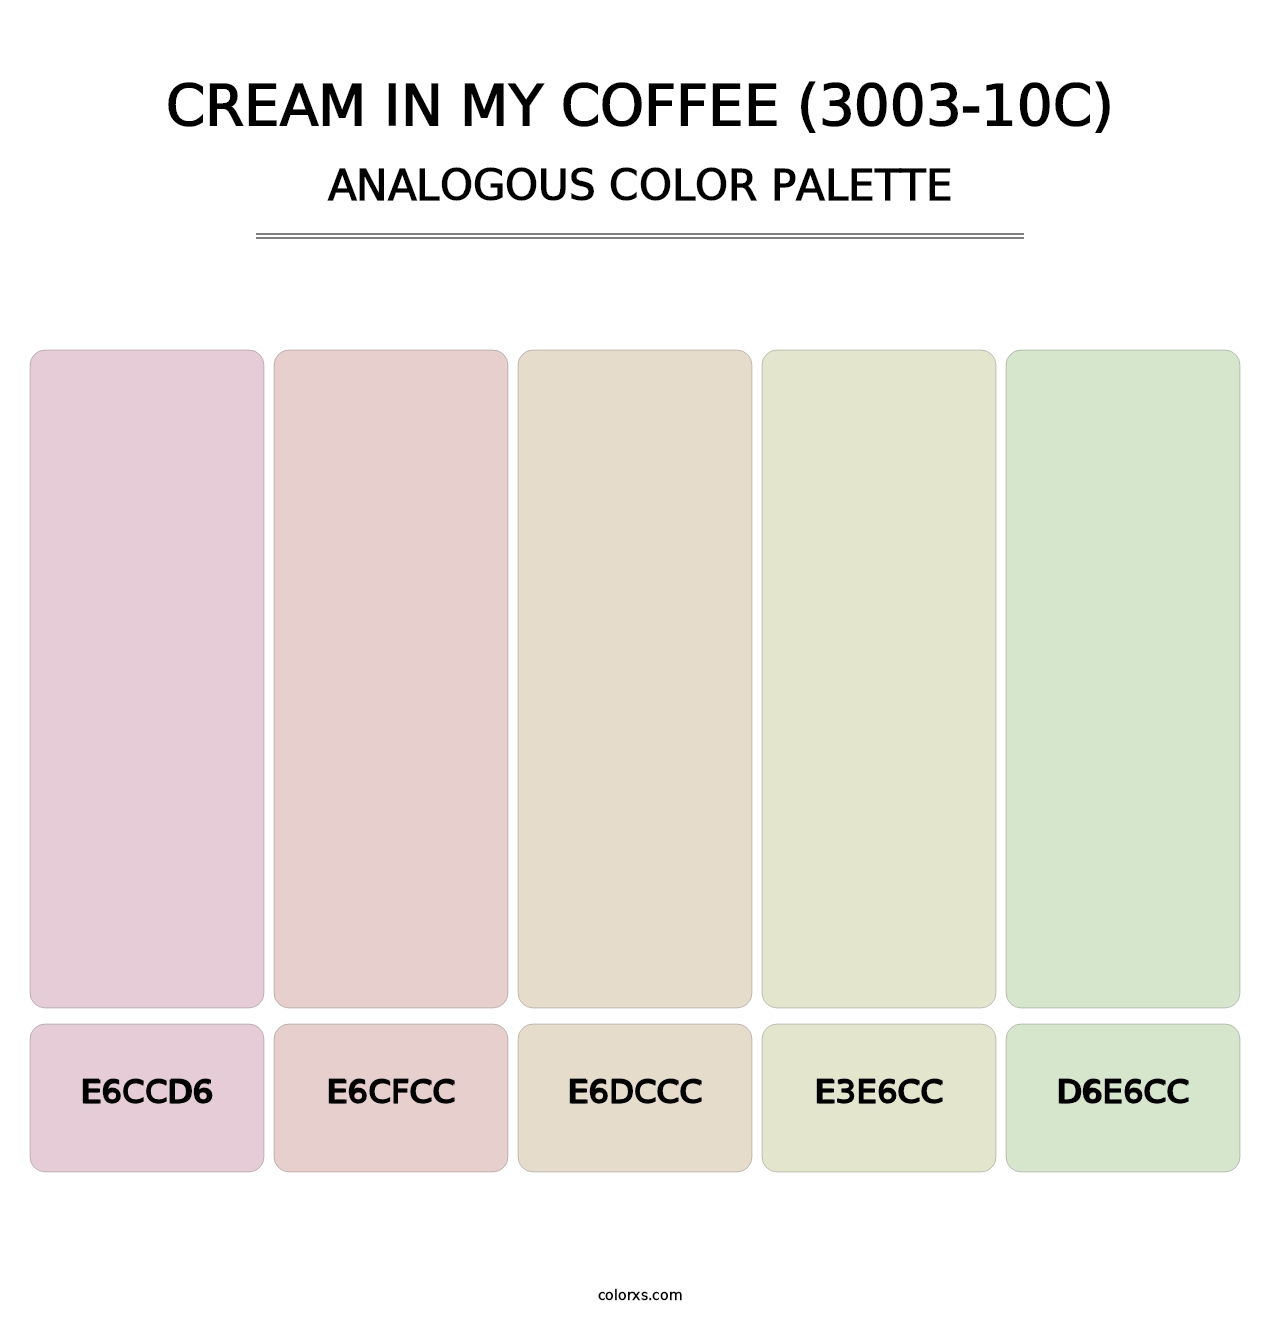 Cream in My Coffee (3003-10C) - Analogous Color Palette